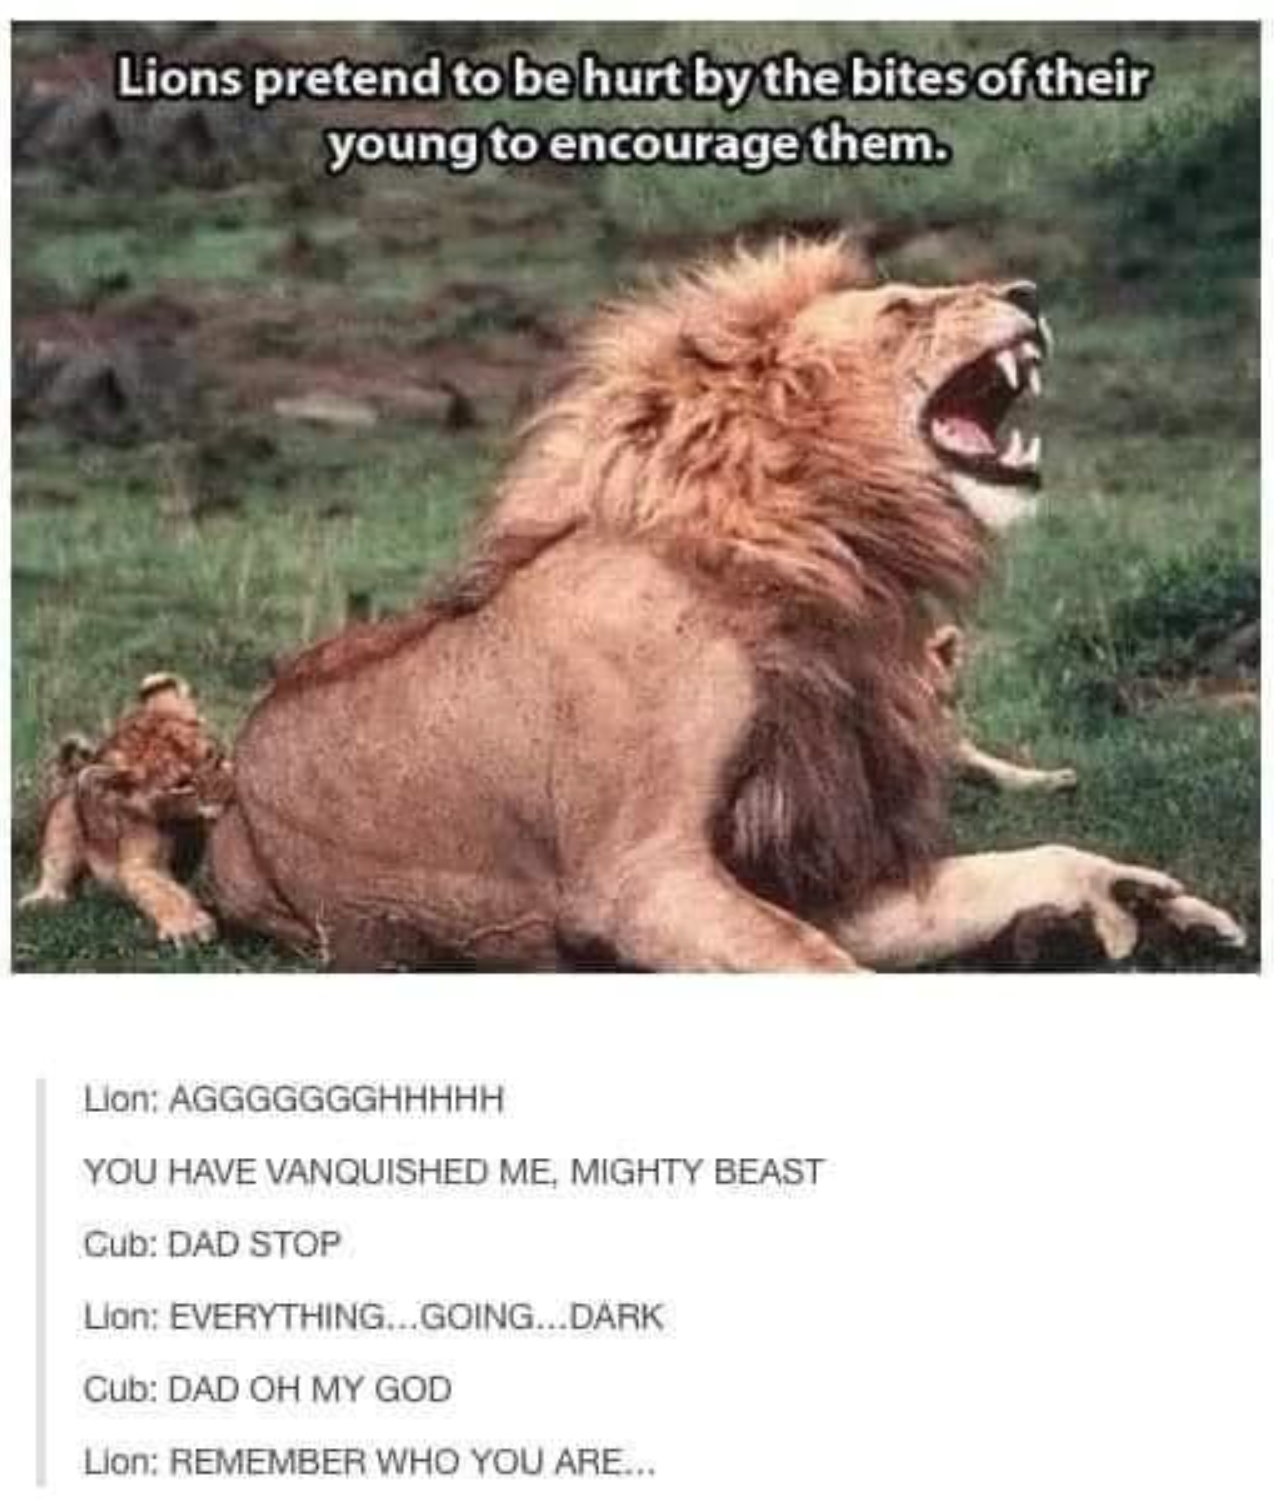 funny lions - Lions pretend to be hurt by the bites of their young to encourage them. Lion Aggggggghhhhh You Have Vanquished Me. Mighty Beast Cub Dad Stop Lion Everything...Going...Dark Cub Dad Oh My God Llons Remember Who You Are...